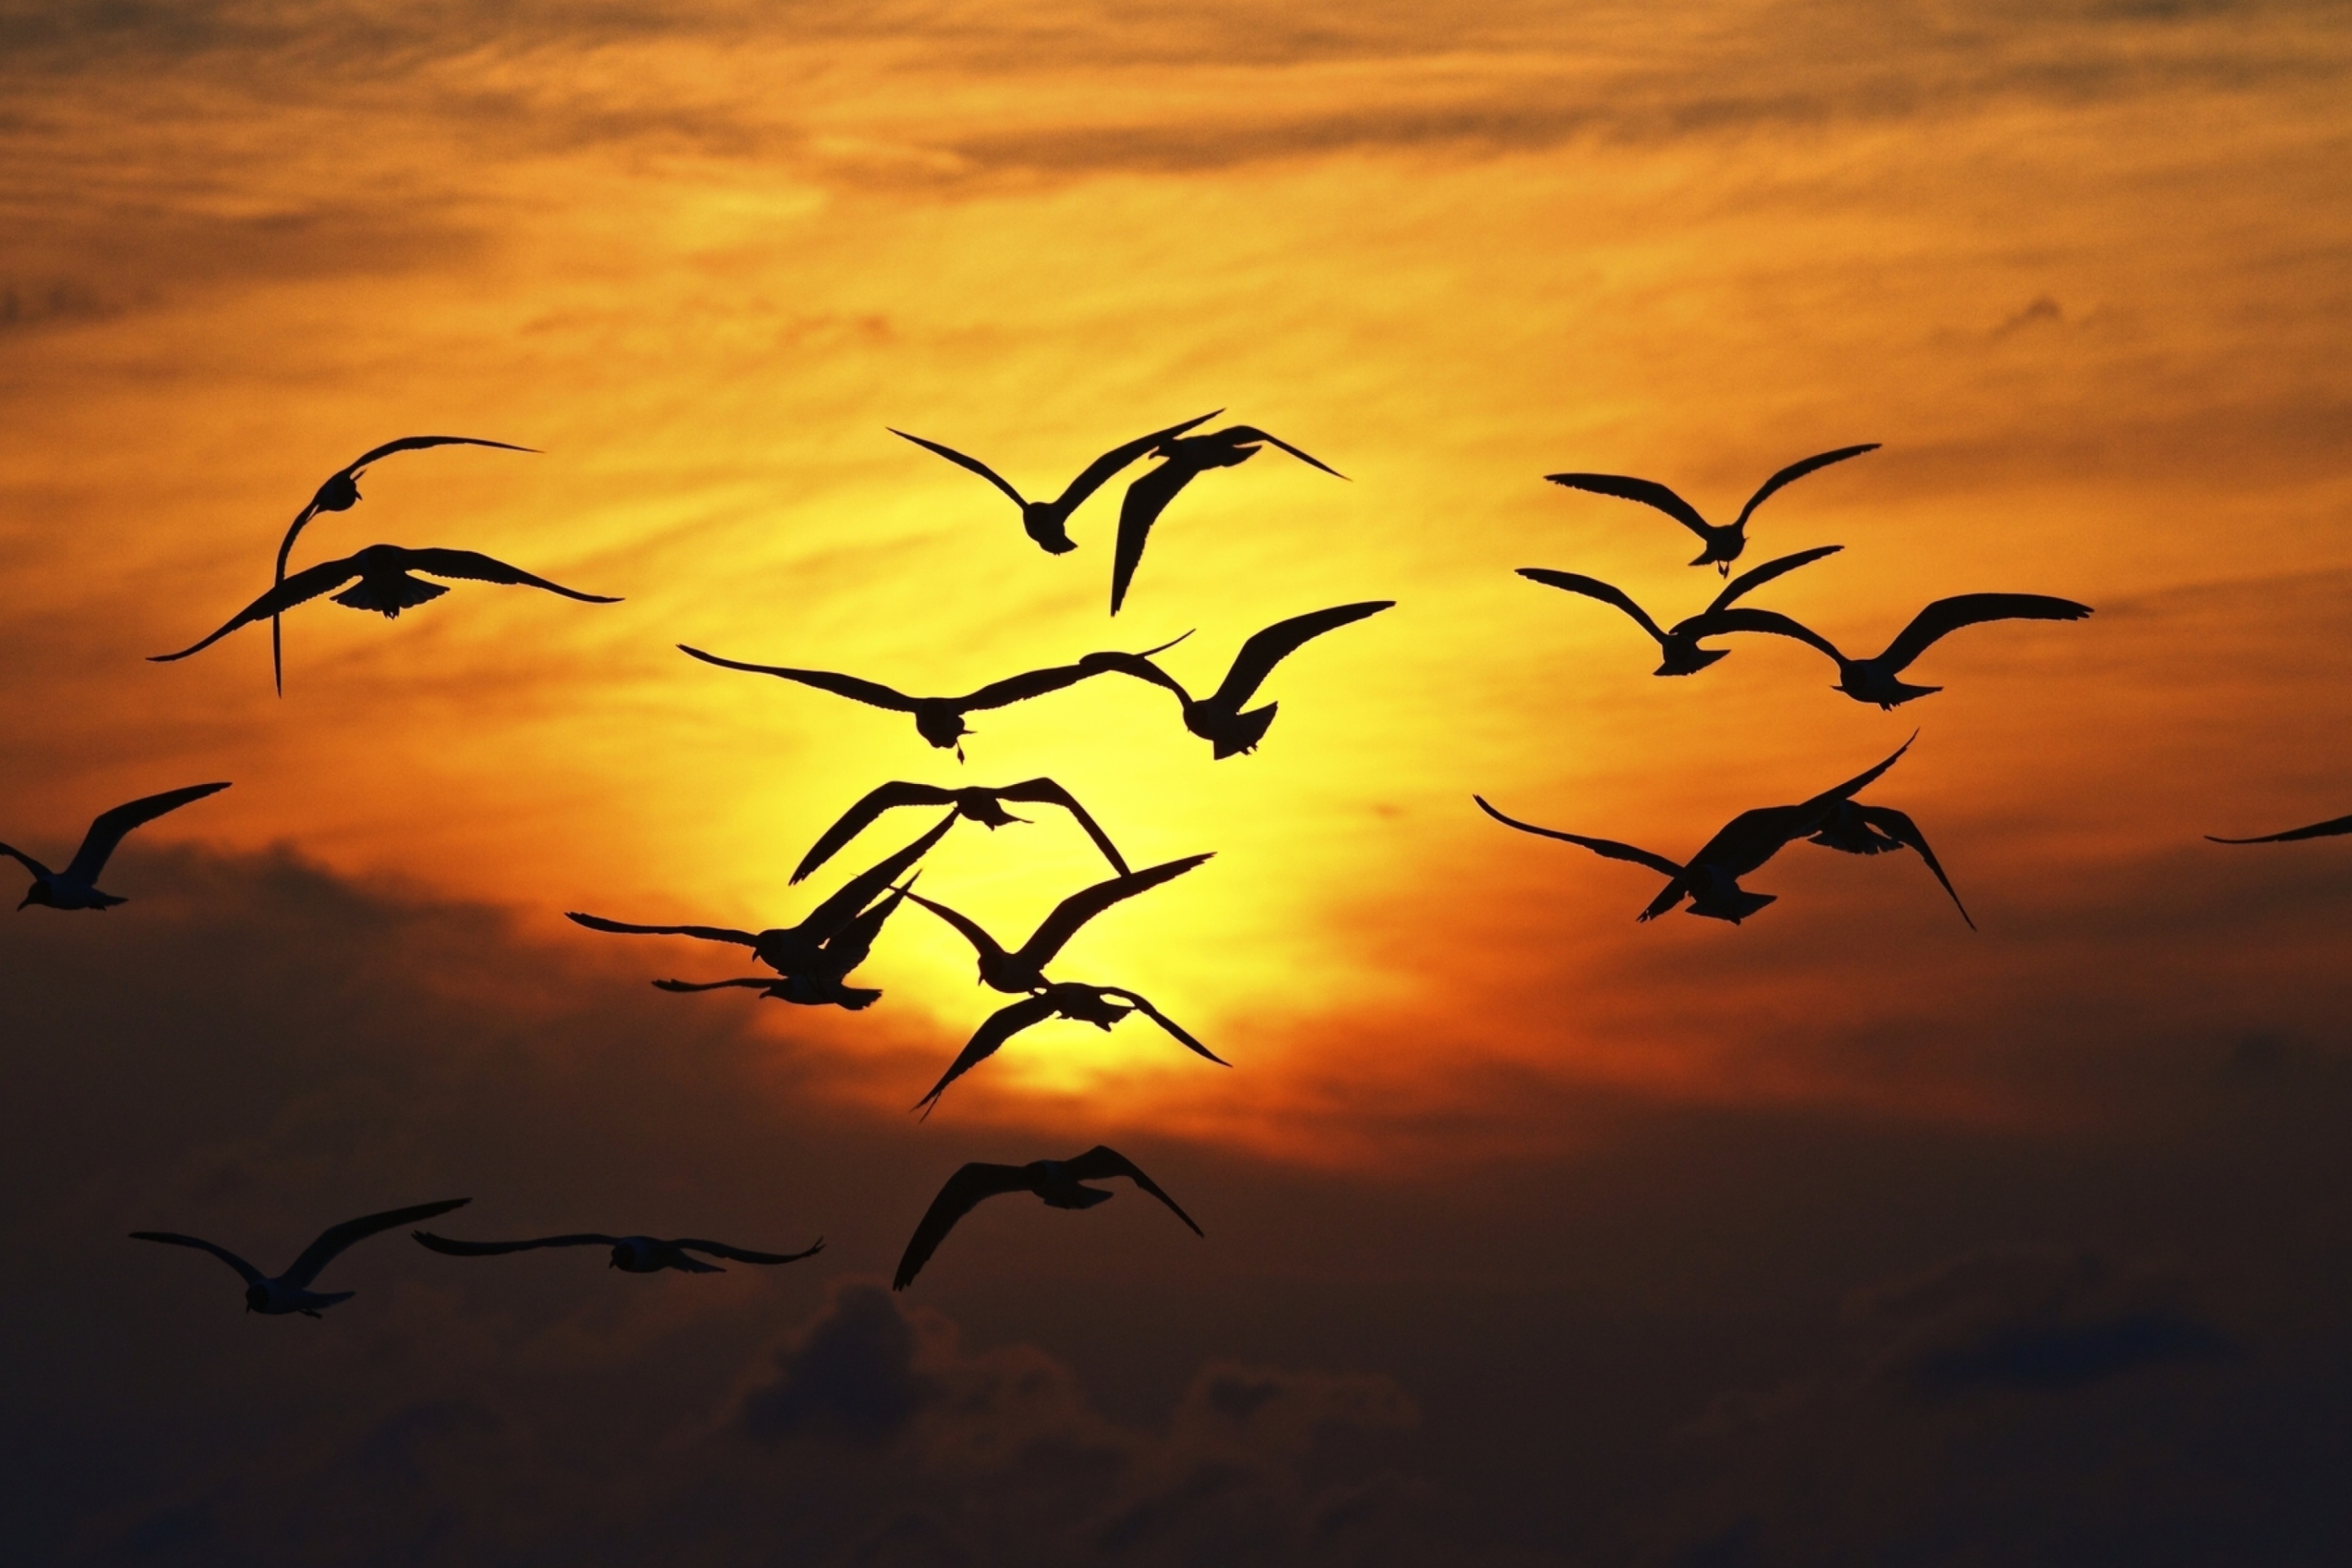 Birds Silhouettes At Sunset wallpaper 2880x1920